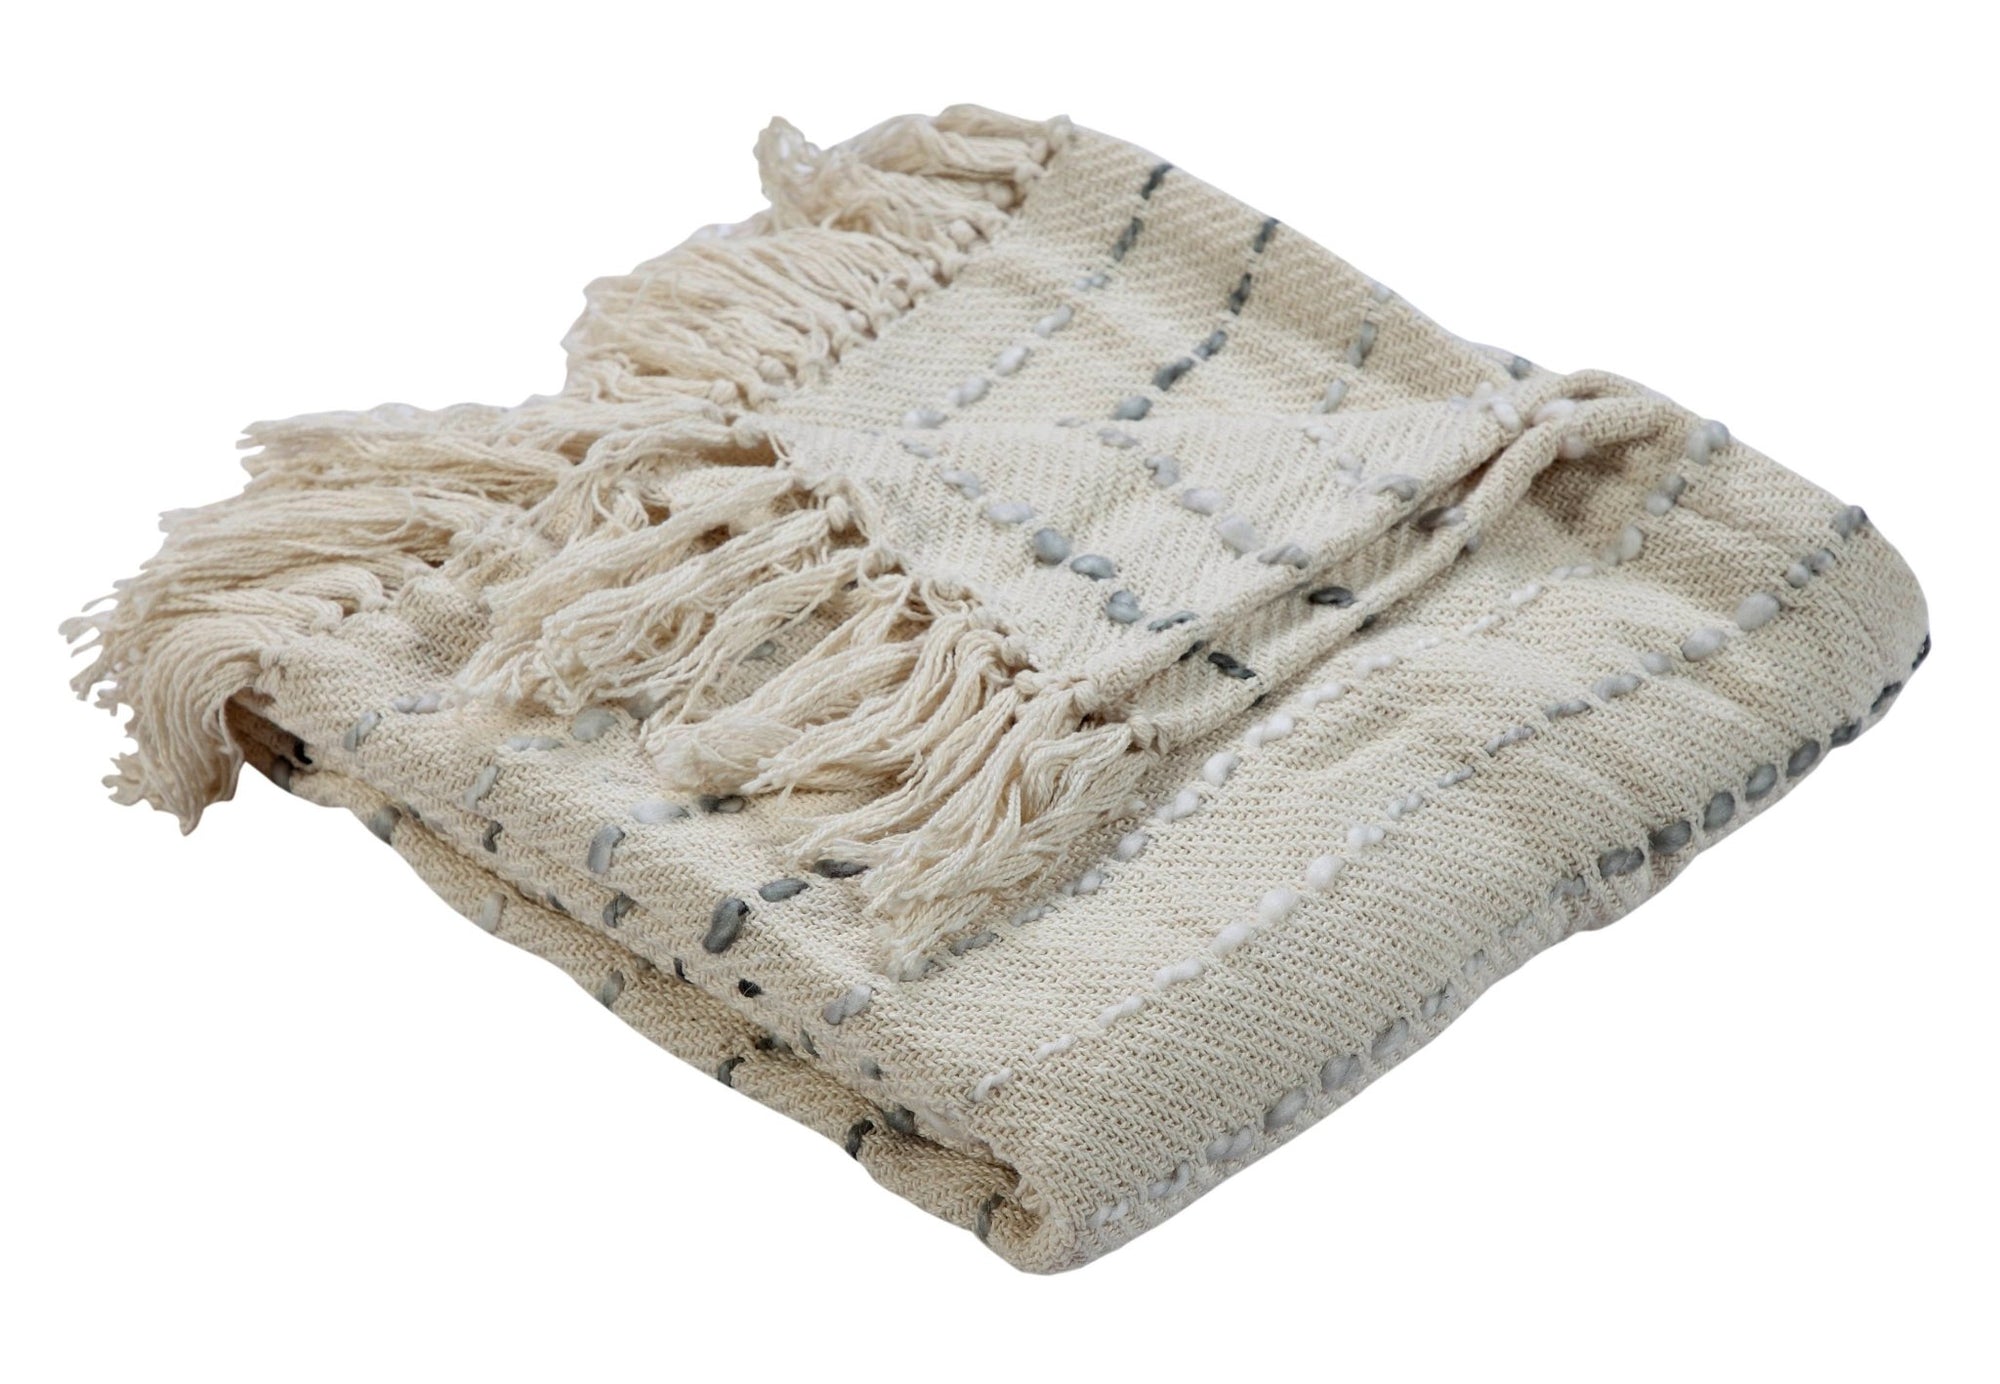 Interwoven Grayscale LR80138 Throw Blanket - Rug & Home